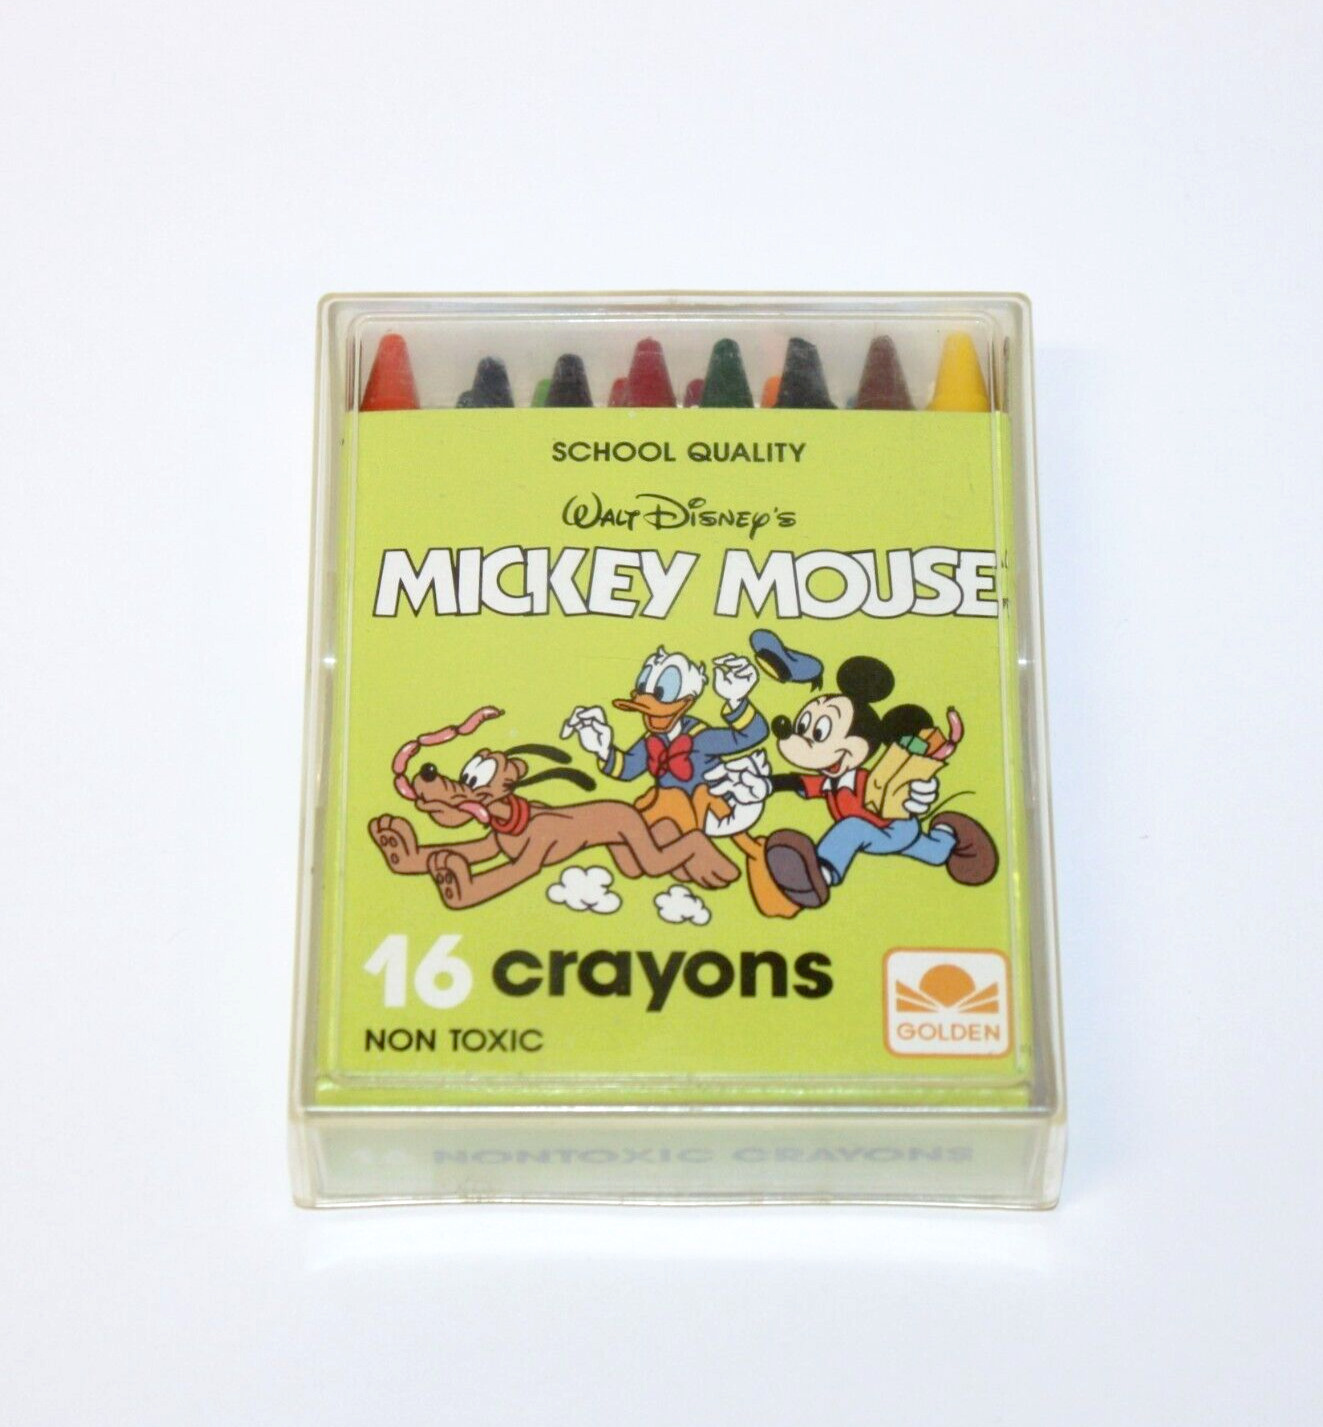 VTG Disney Mickey Mouse Coloring Crayons 16 Count School Quality Golden 4215-8